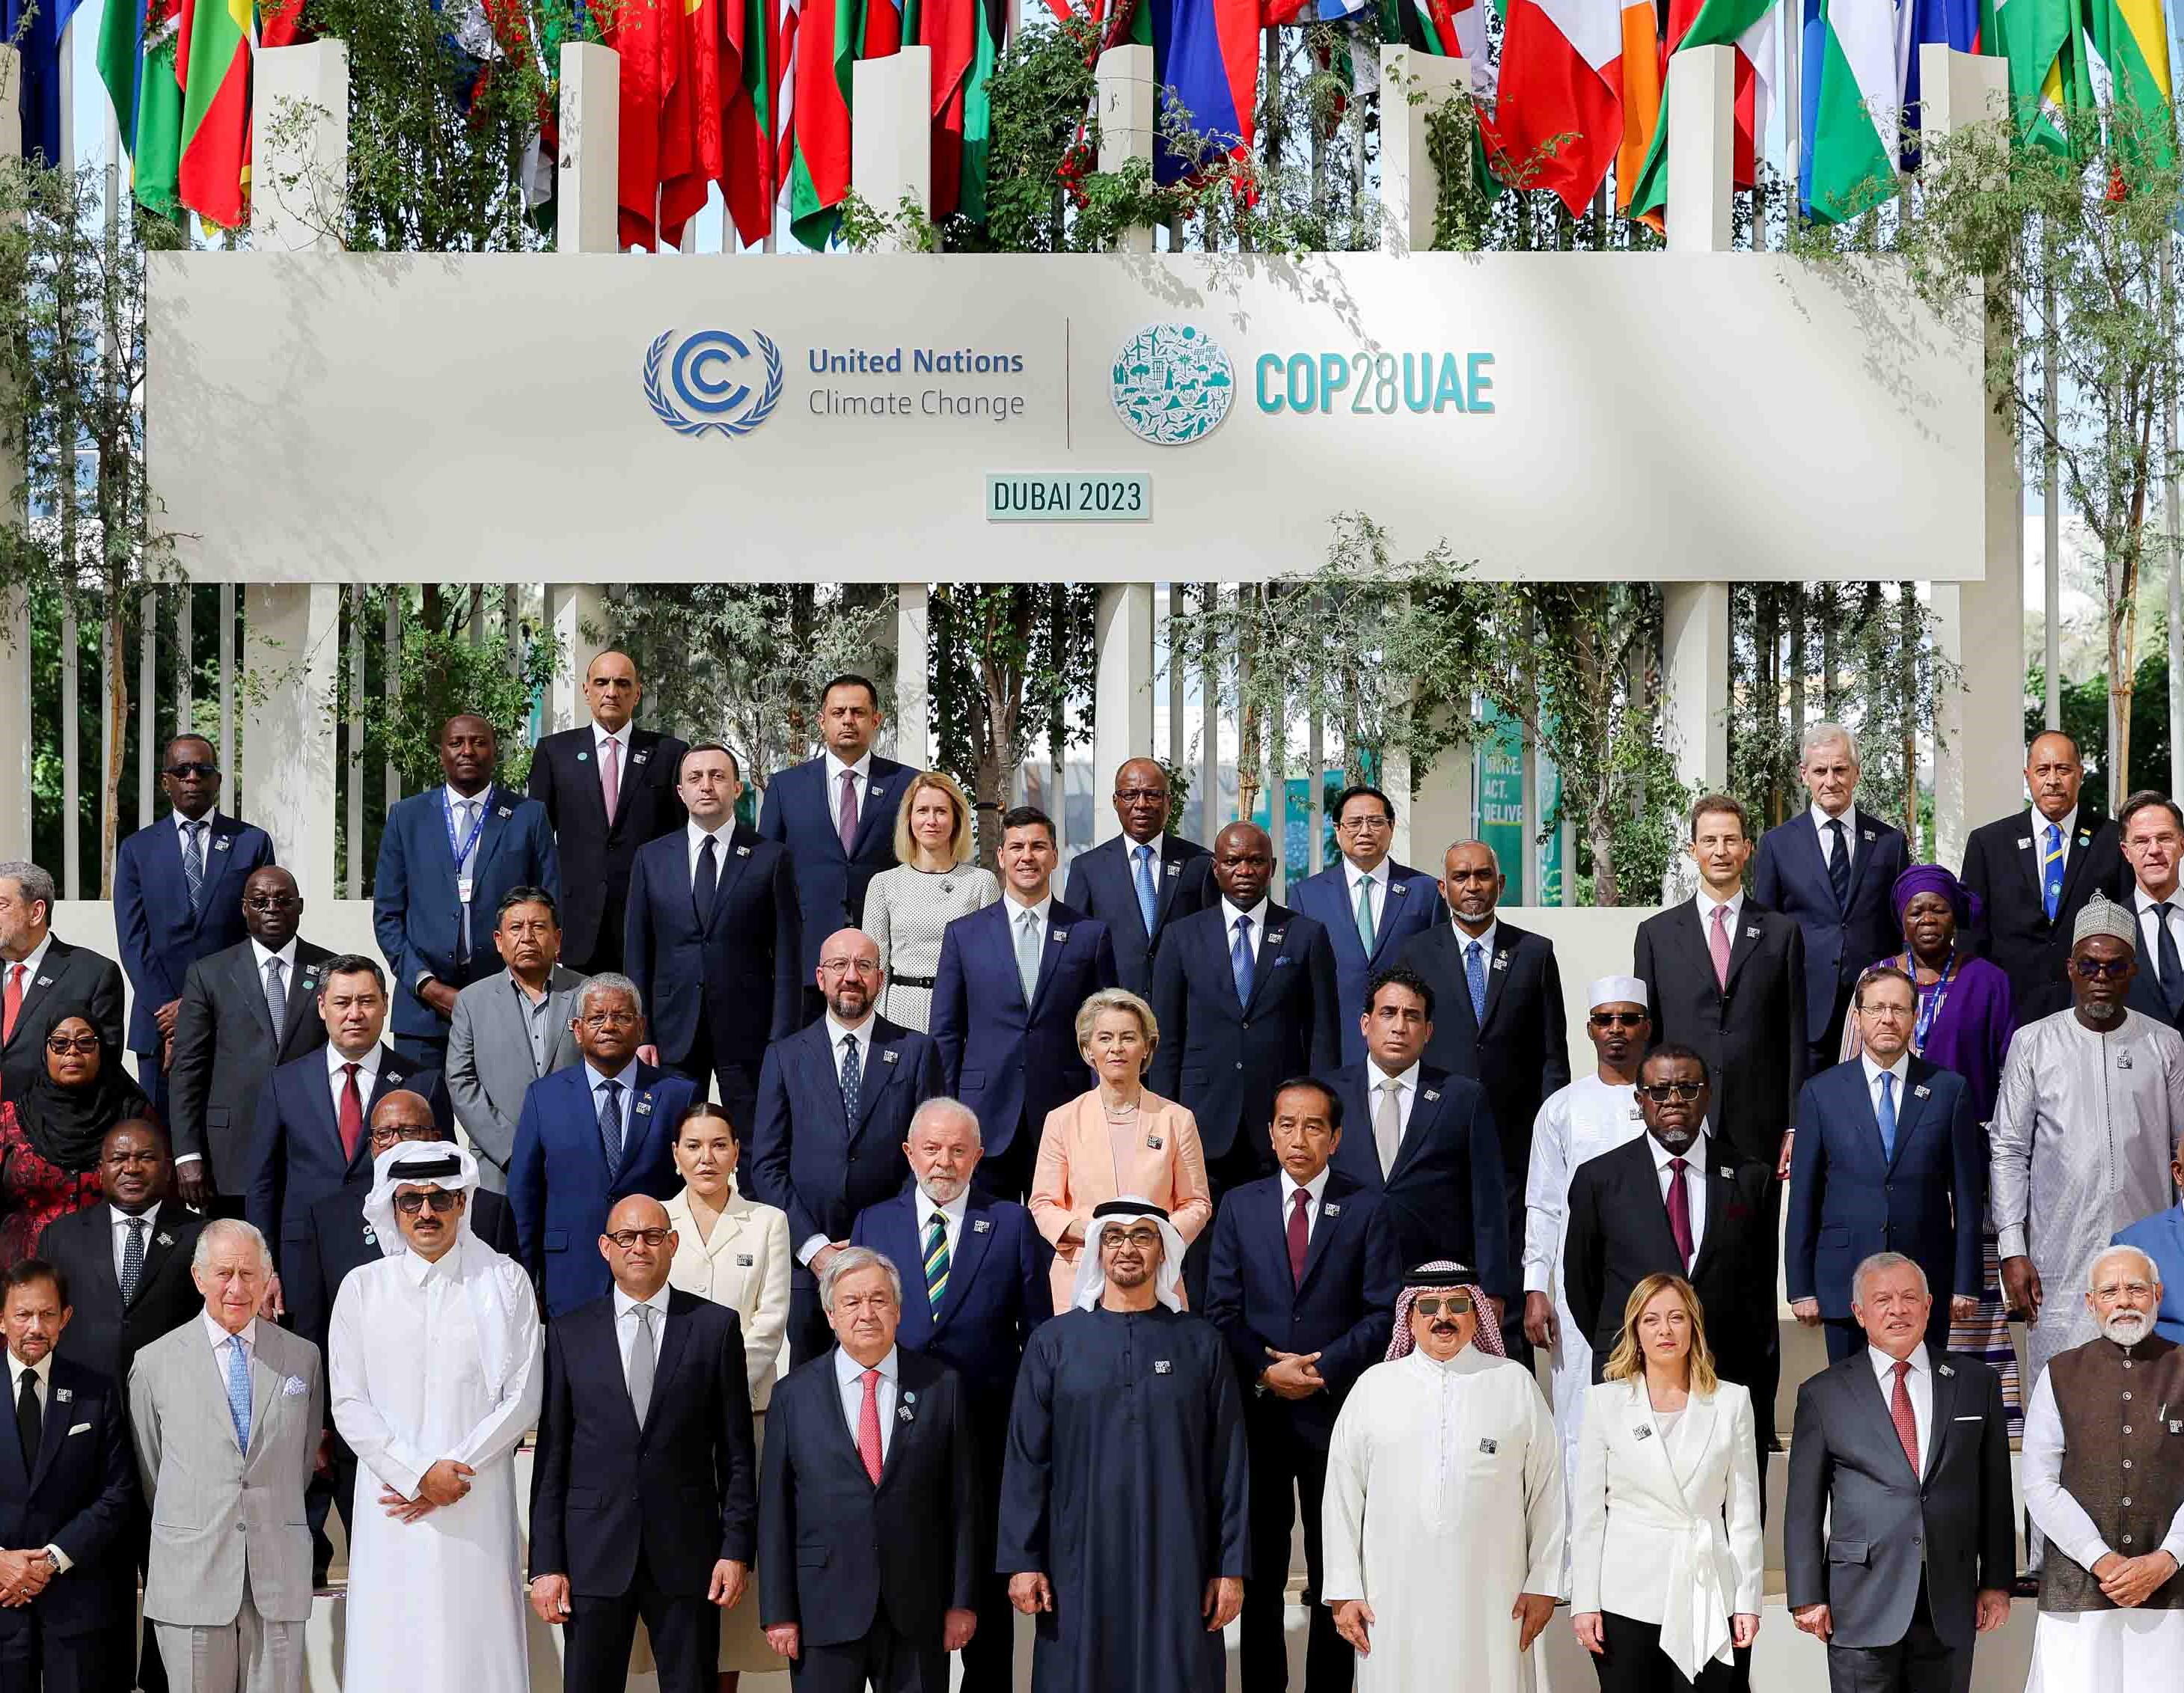 December 1 - World Climate Action Summit